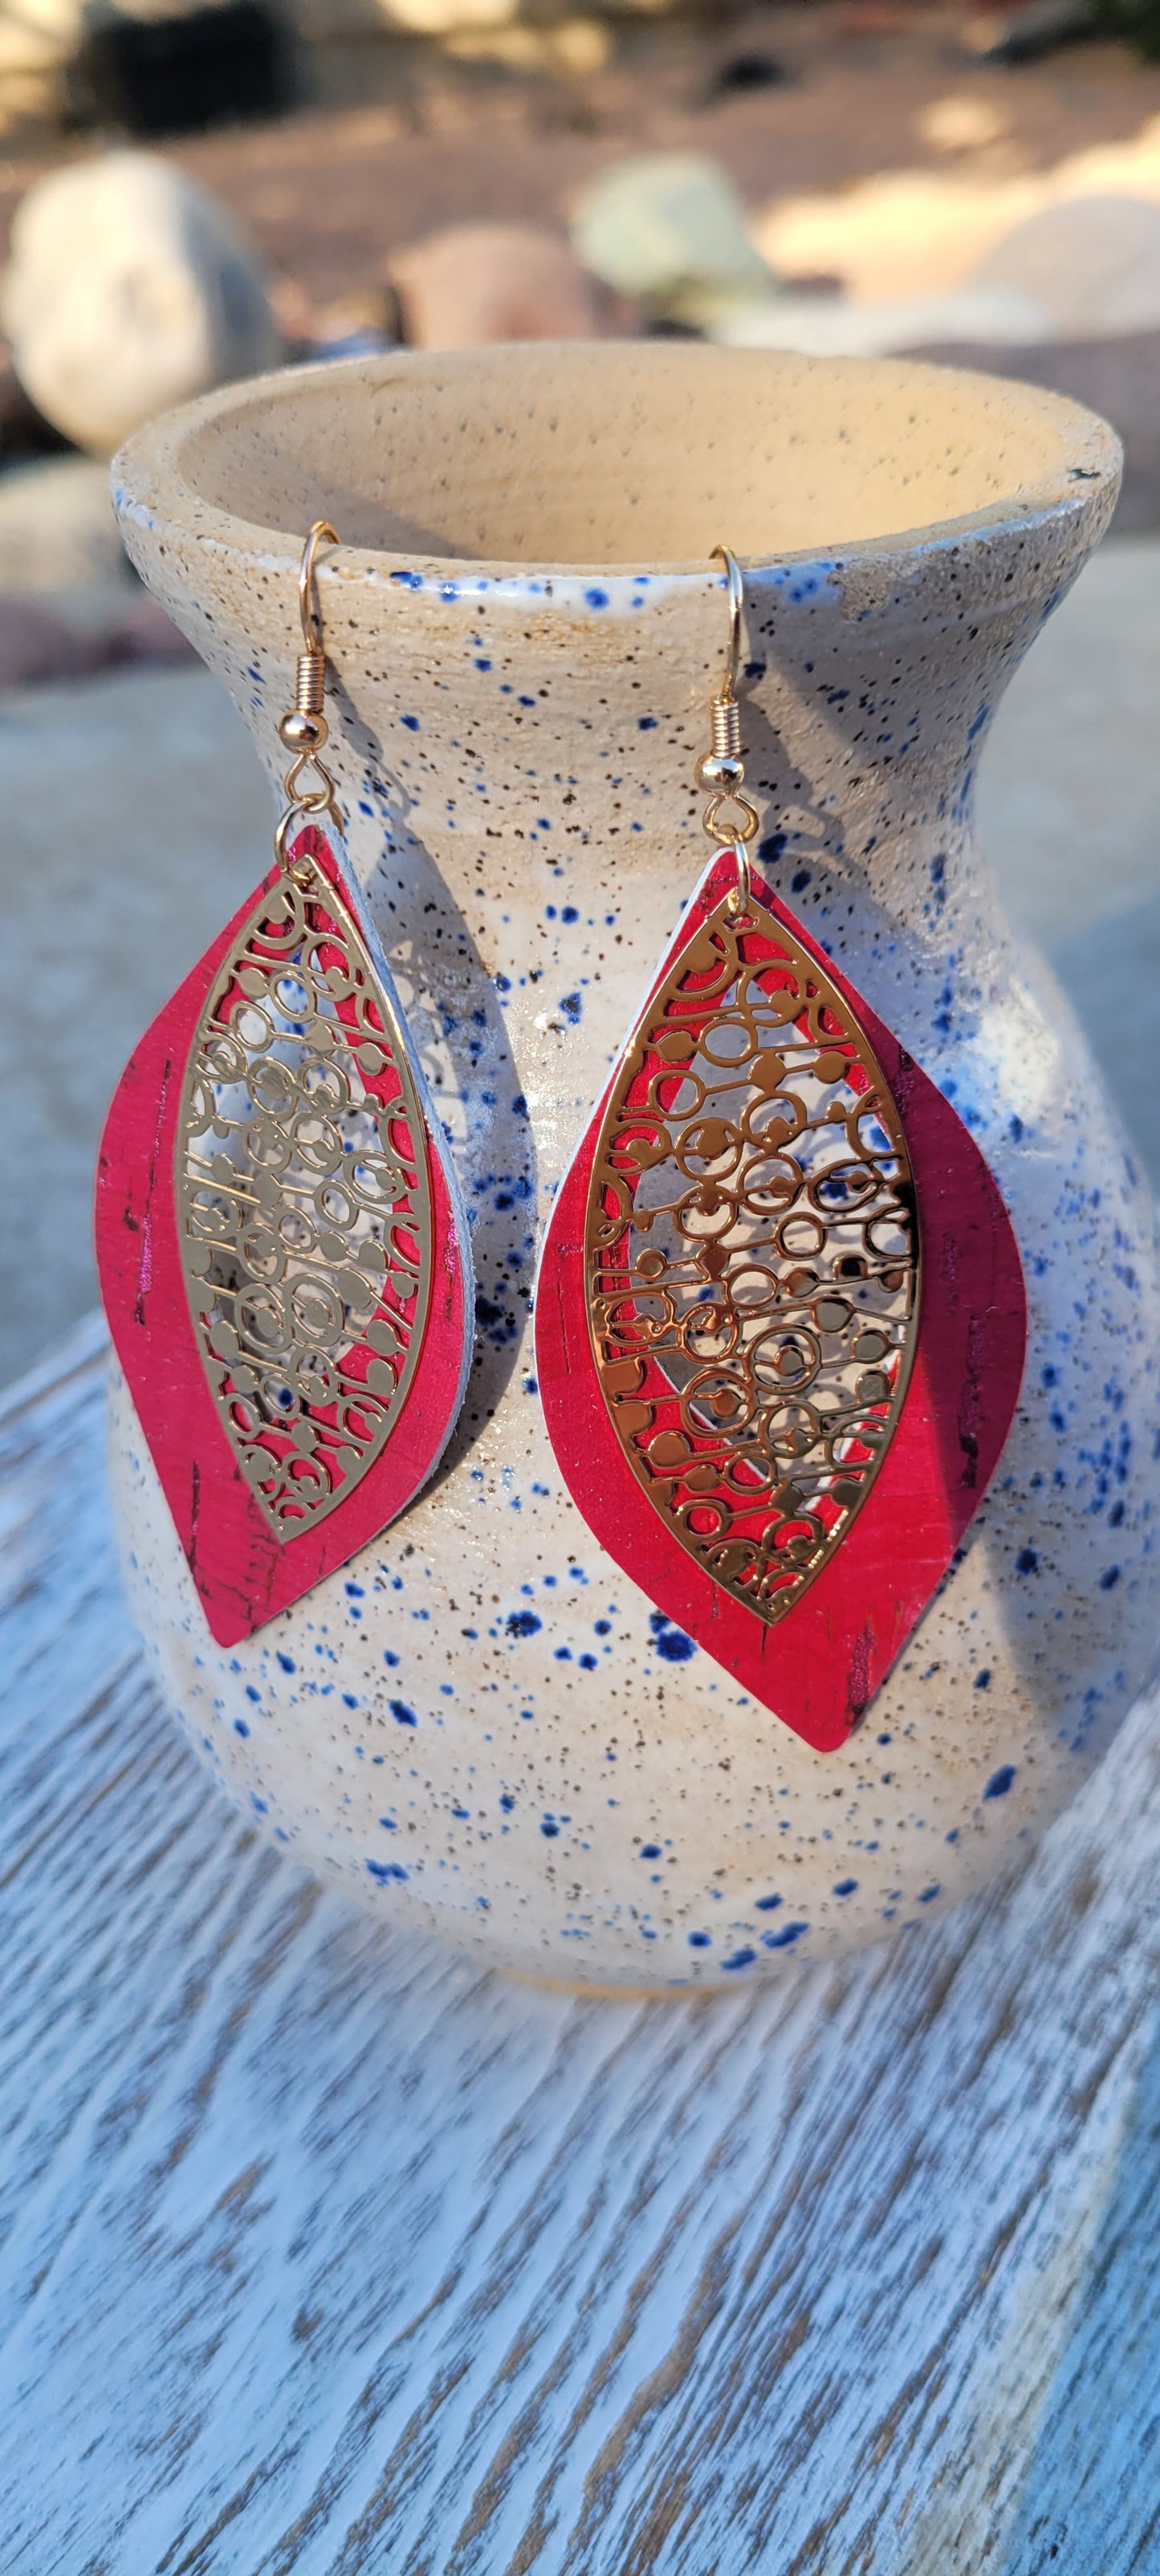 Marquise shape Genuine leather Fuchsia cork print on leather Brushed gold circle and dots design Brushed gold fish hook dangle earrings Rubber earring back Whether you want to be on the wild side or classy this earring set it will add a fun touch to your outfit